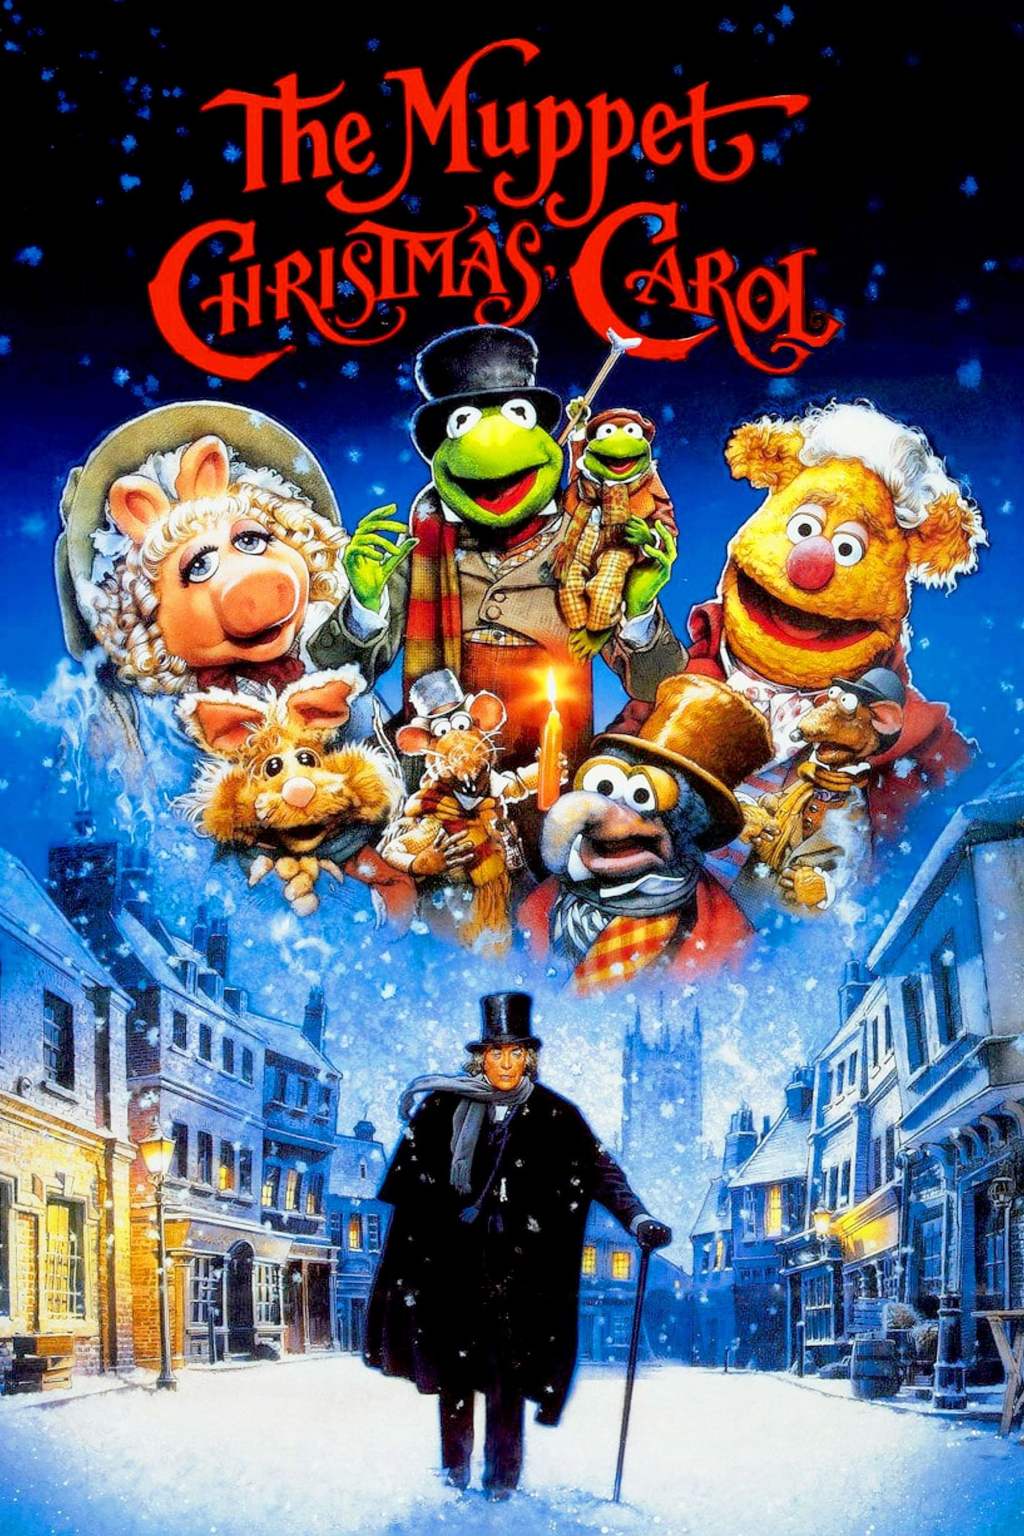 The Muppet Christmas Carol – Good but Scrooge is not “scroogie” enough.